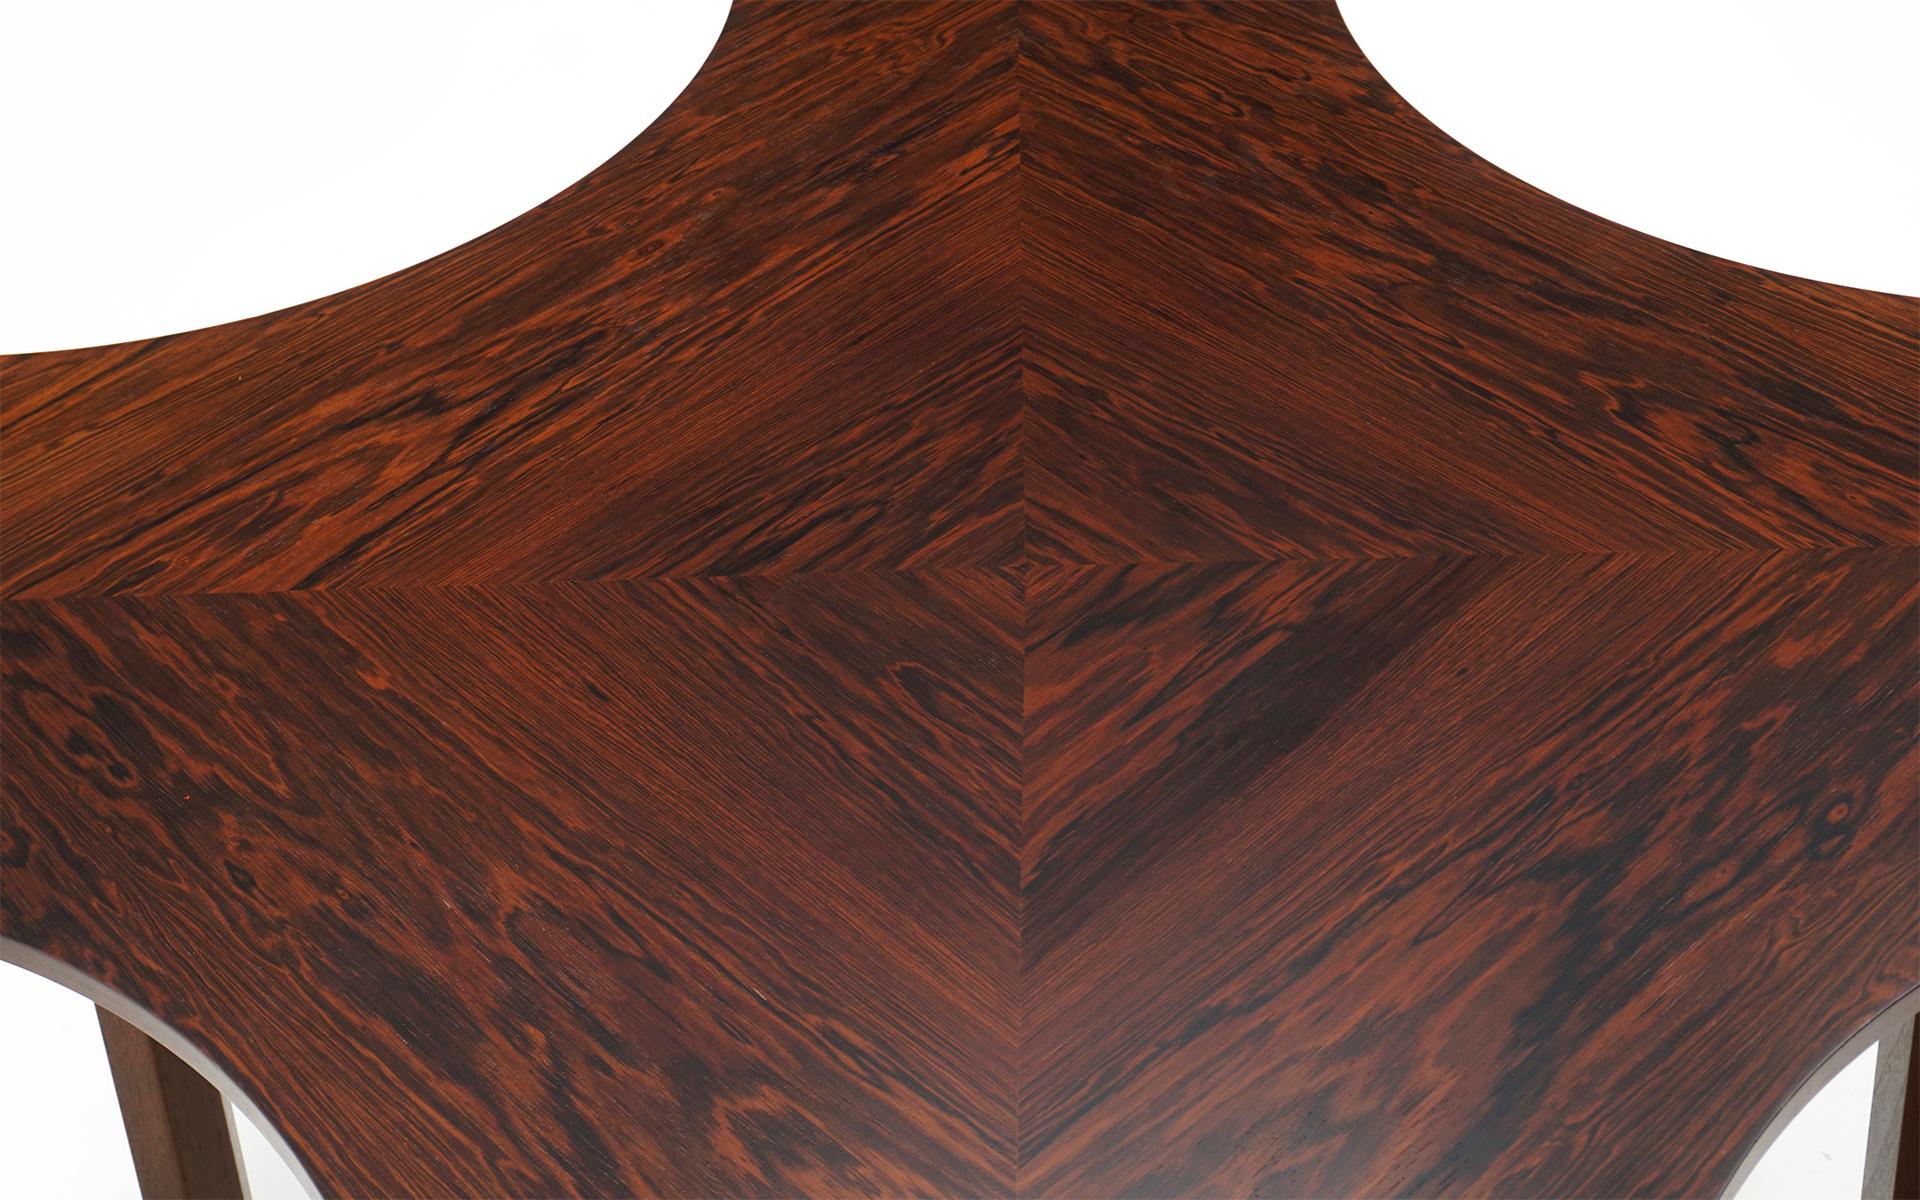 Mid-Century Modern Dining / Center Table in Rosewood by Edward Wormley for Dunbar, Clover Shaped